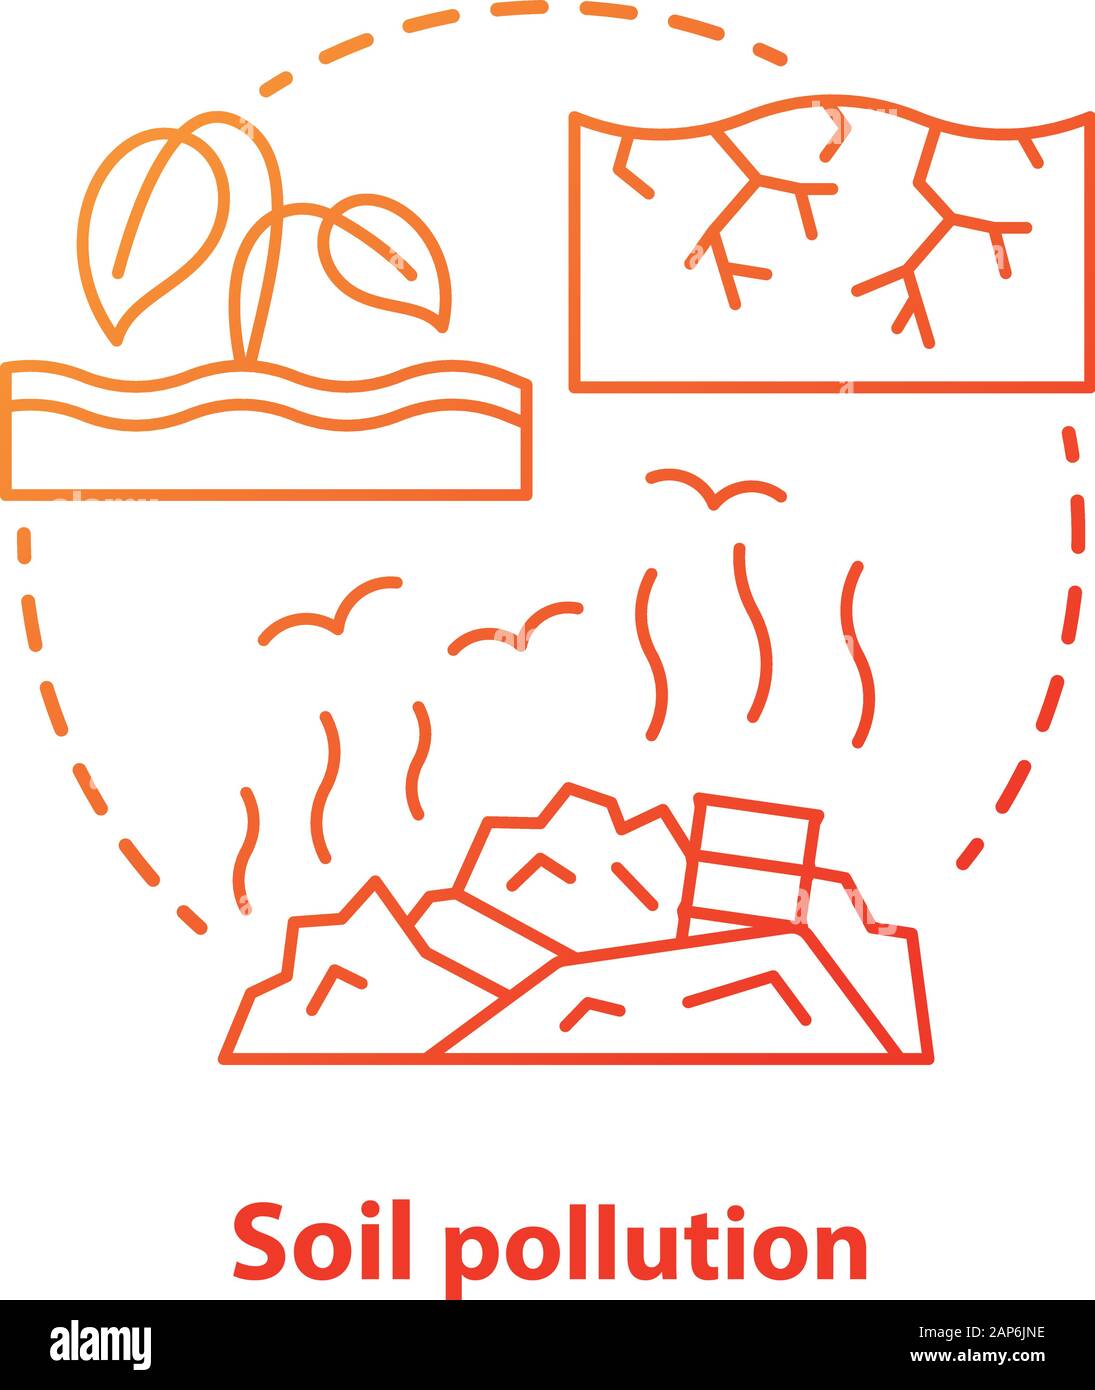 Soil pollution concept icon. Land waste contamination idea thin line illustration in red. Inefficient use of natural resources. Landfills and garbage Stock Vector